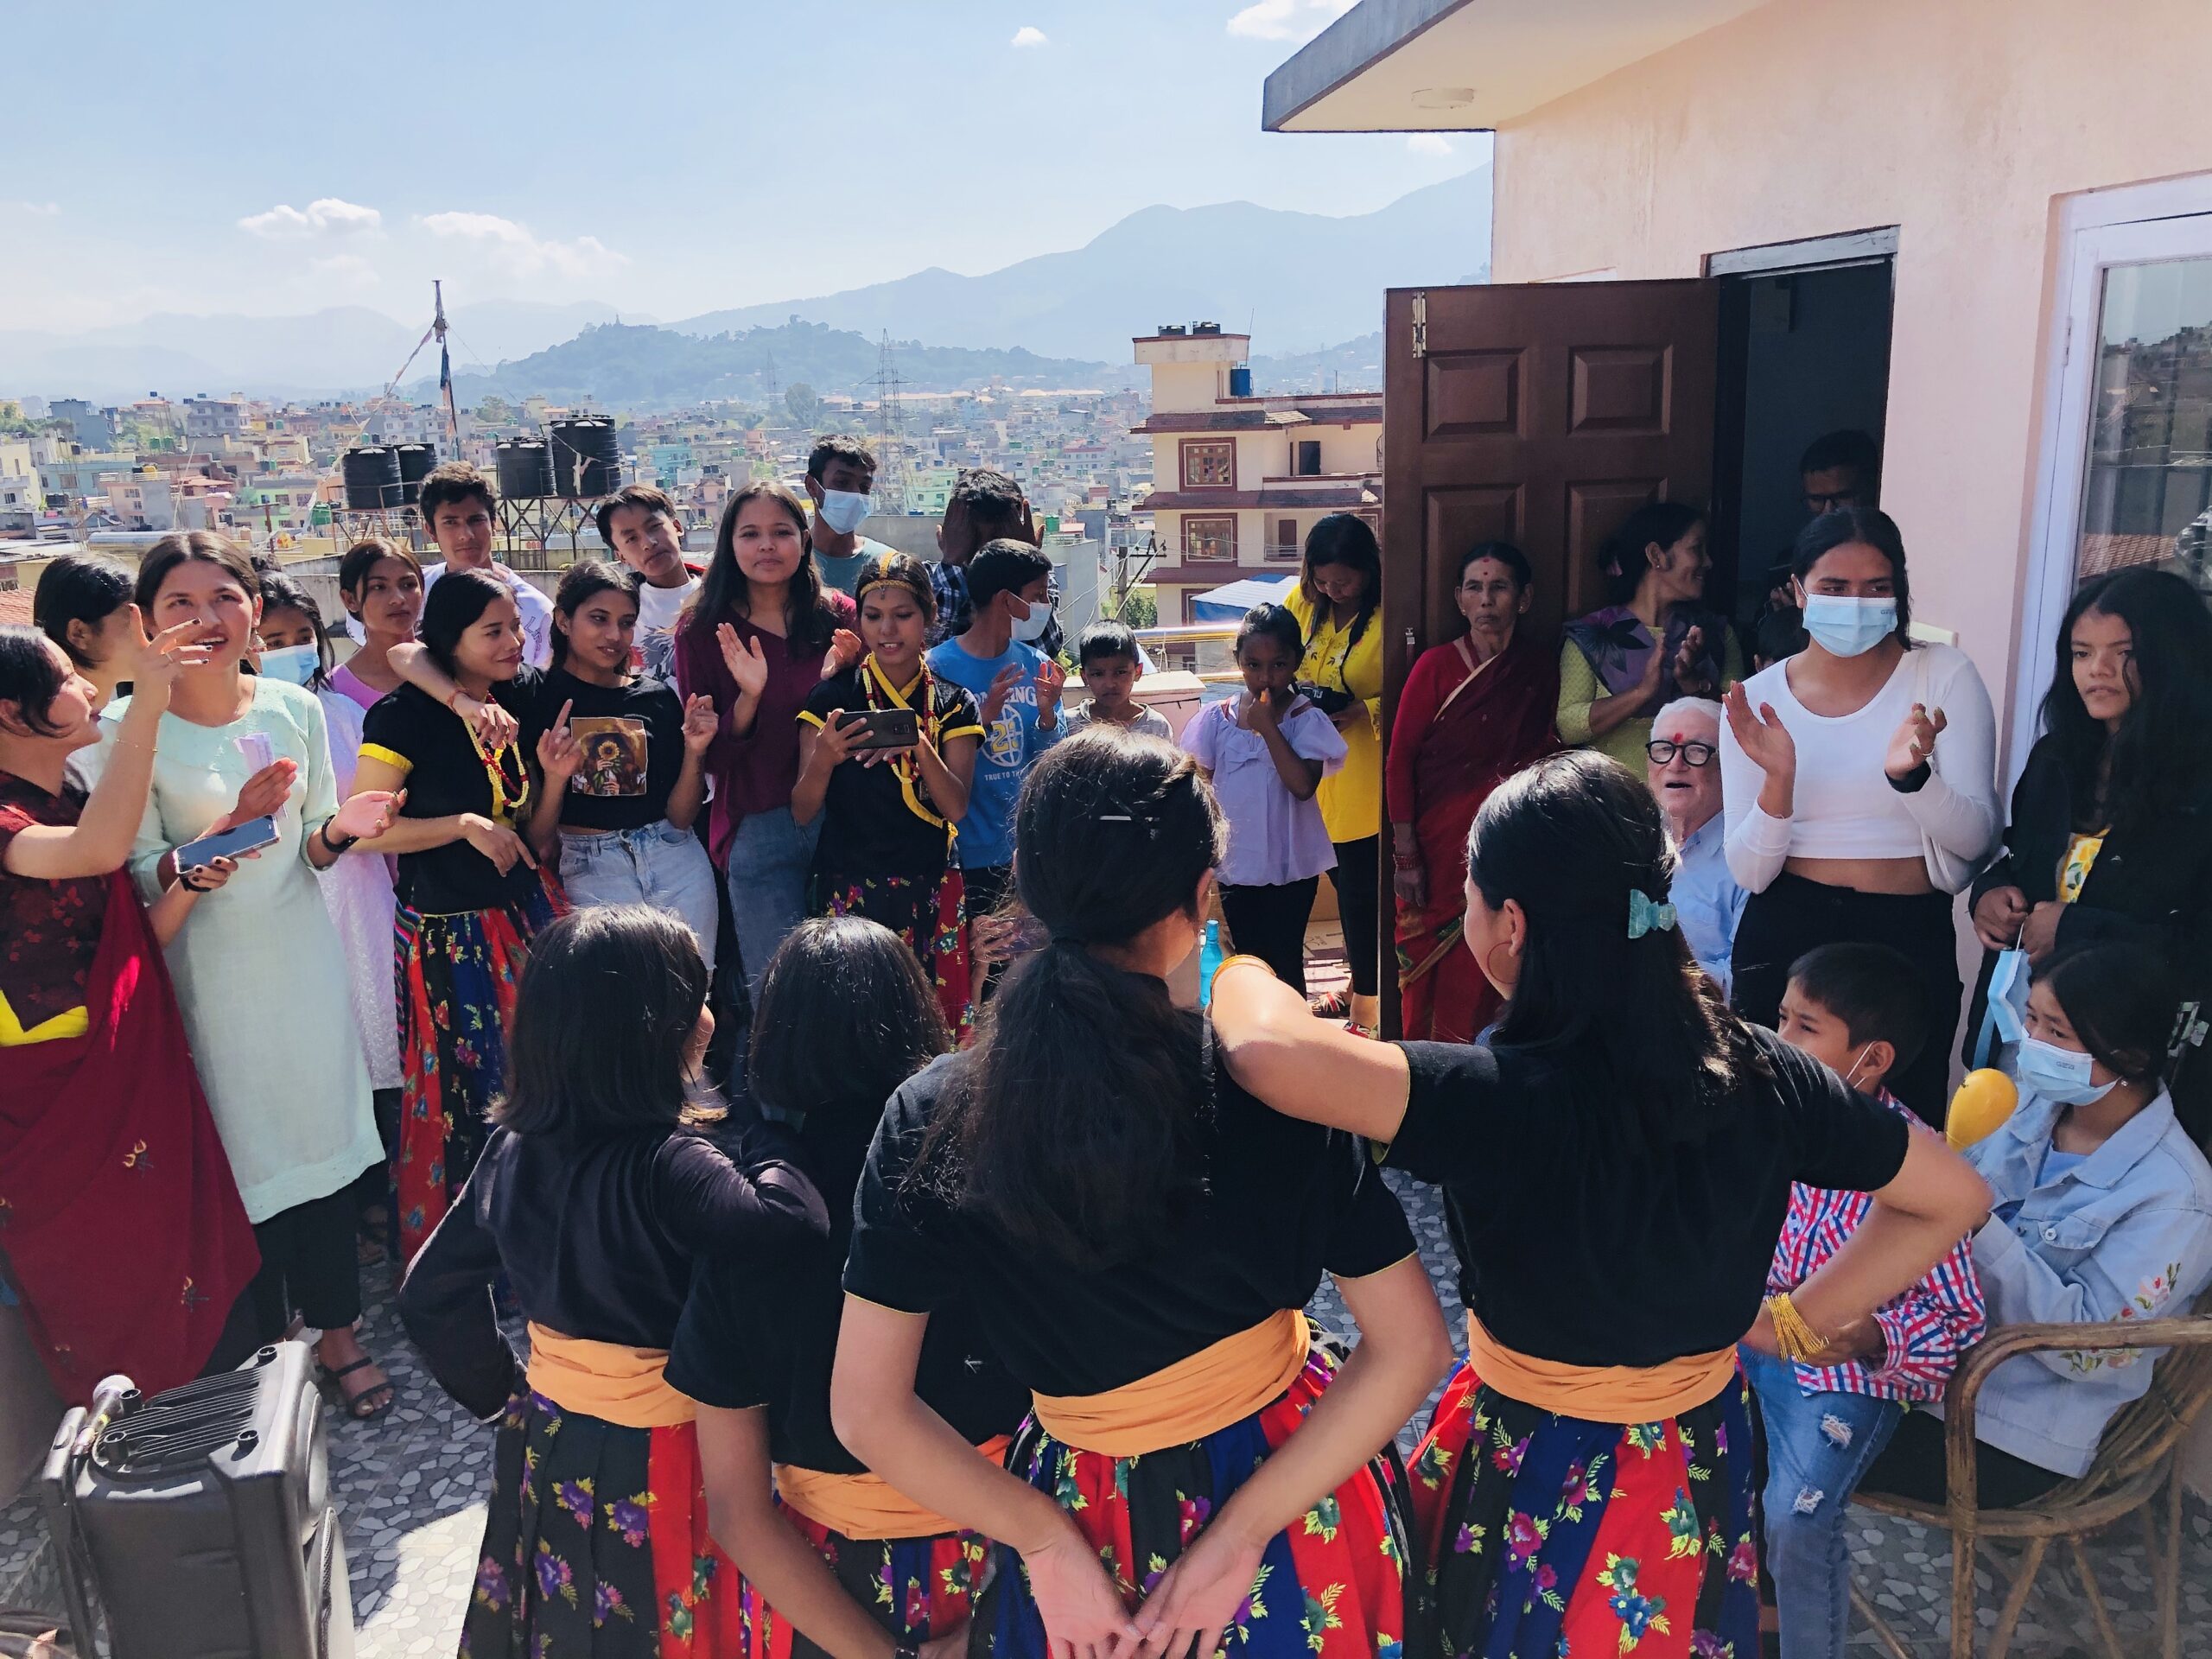 Over 20 Olgapuri kids participate in the Deusi-Bhailo outside a staff member's house. Everyone's smiling and clapping along -- so much fun during this festival season!